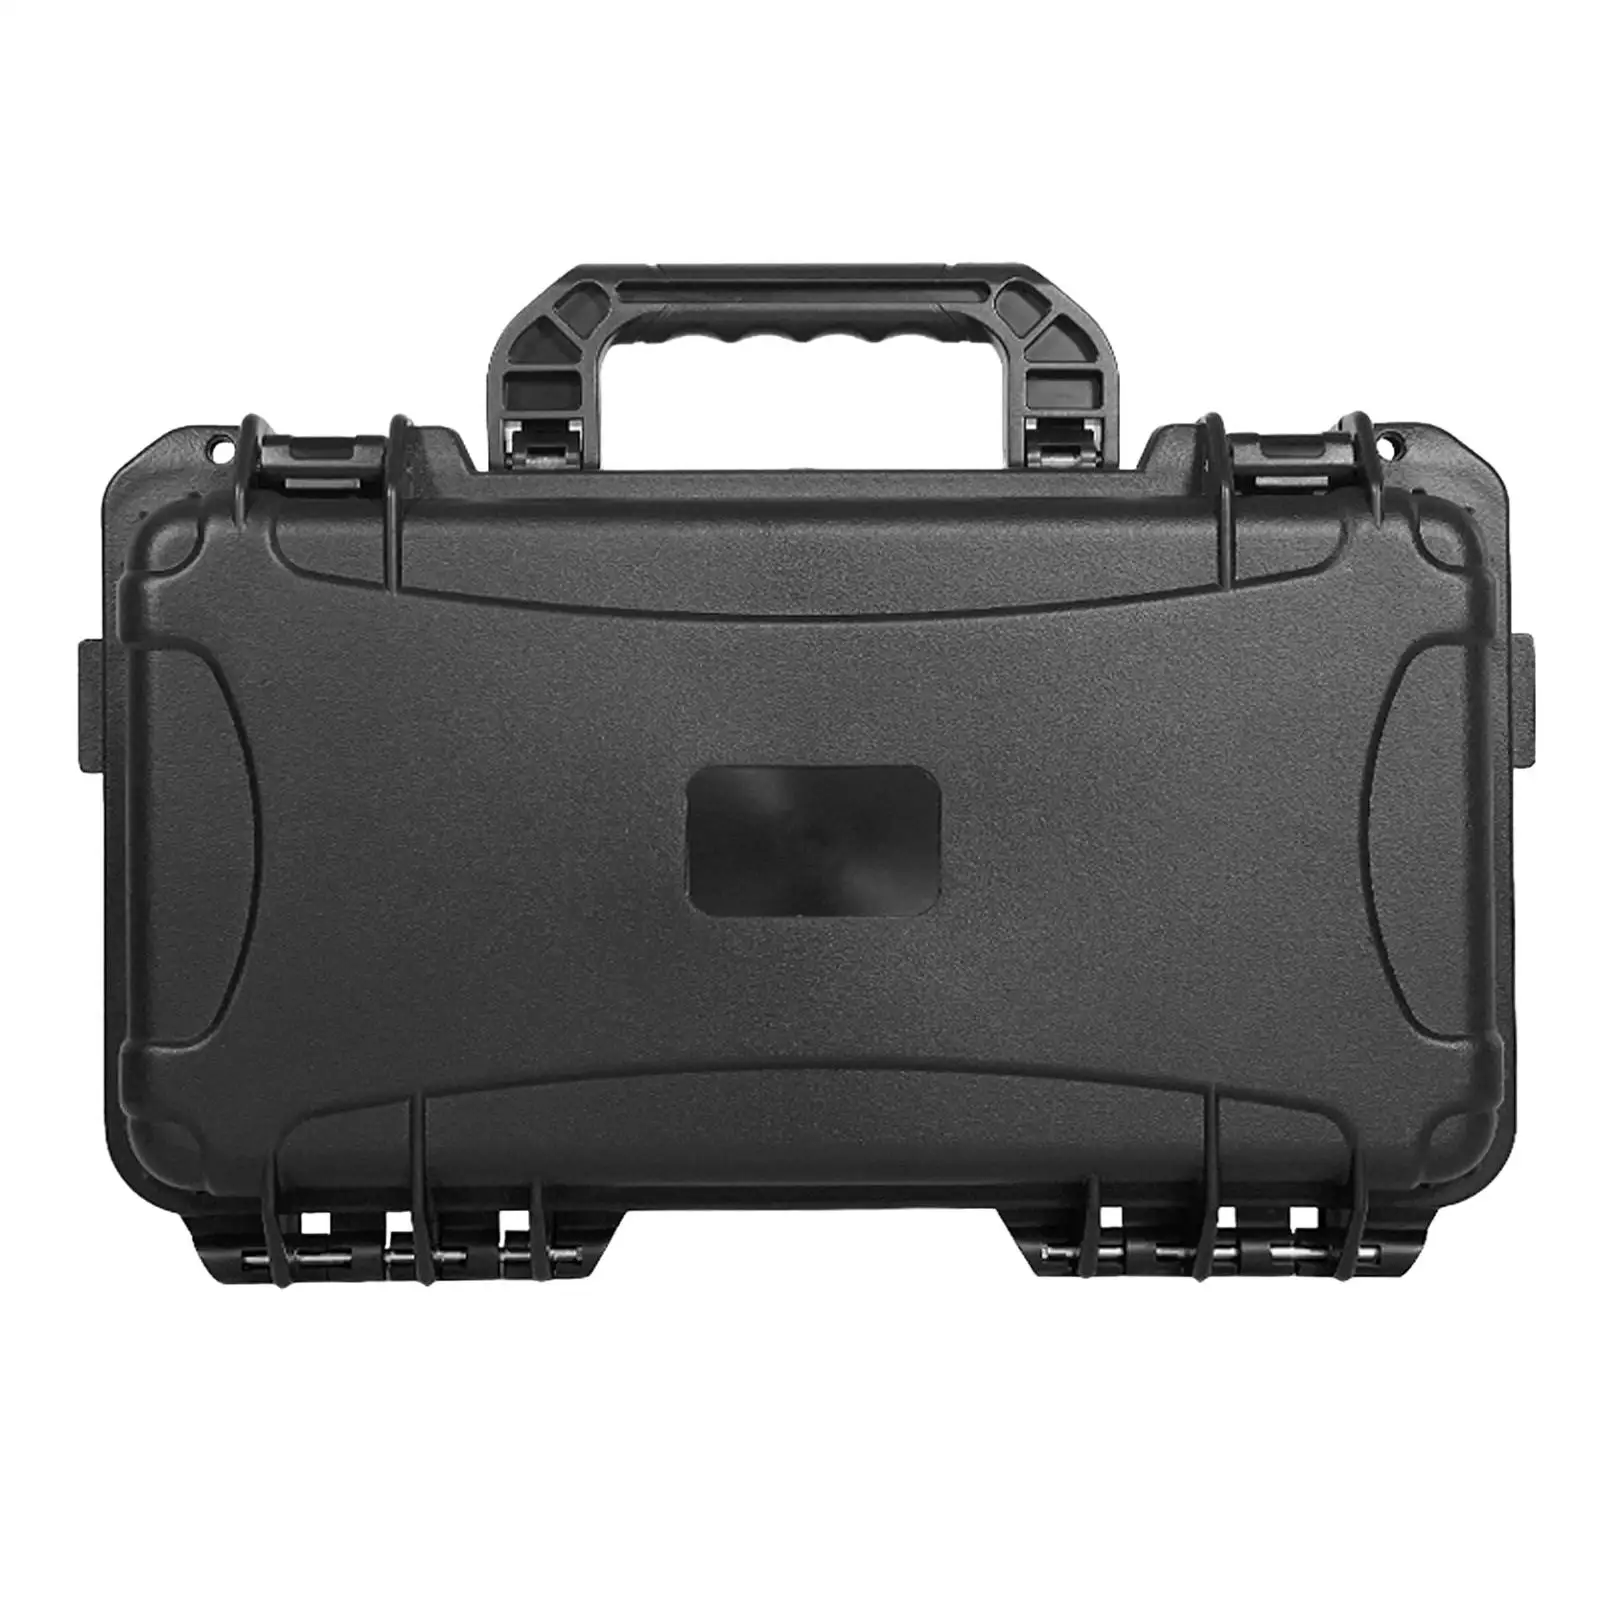 Shockproof Tool Box carry tools Case Shatterproof Waterproof Sealed Box for Photographic Equipment Camping Transportation